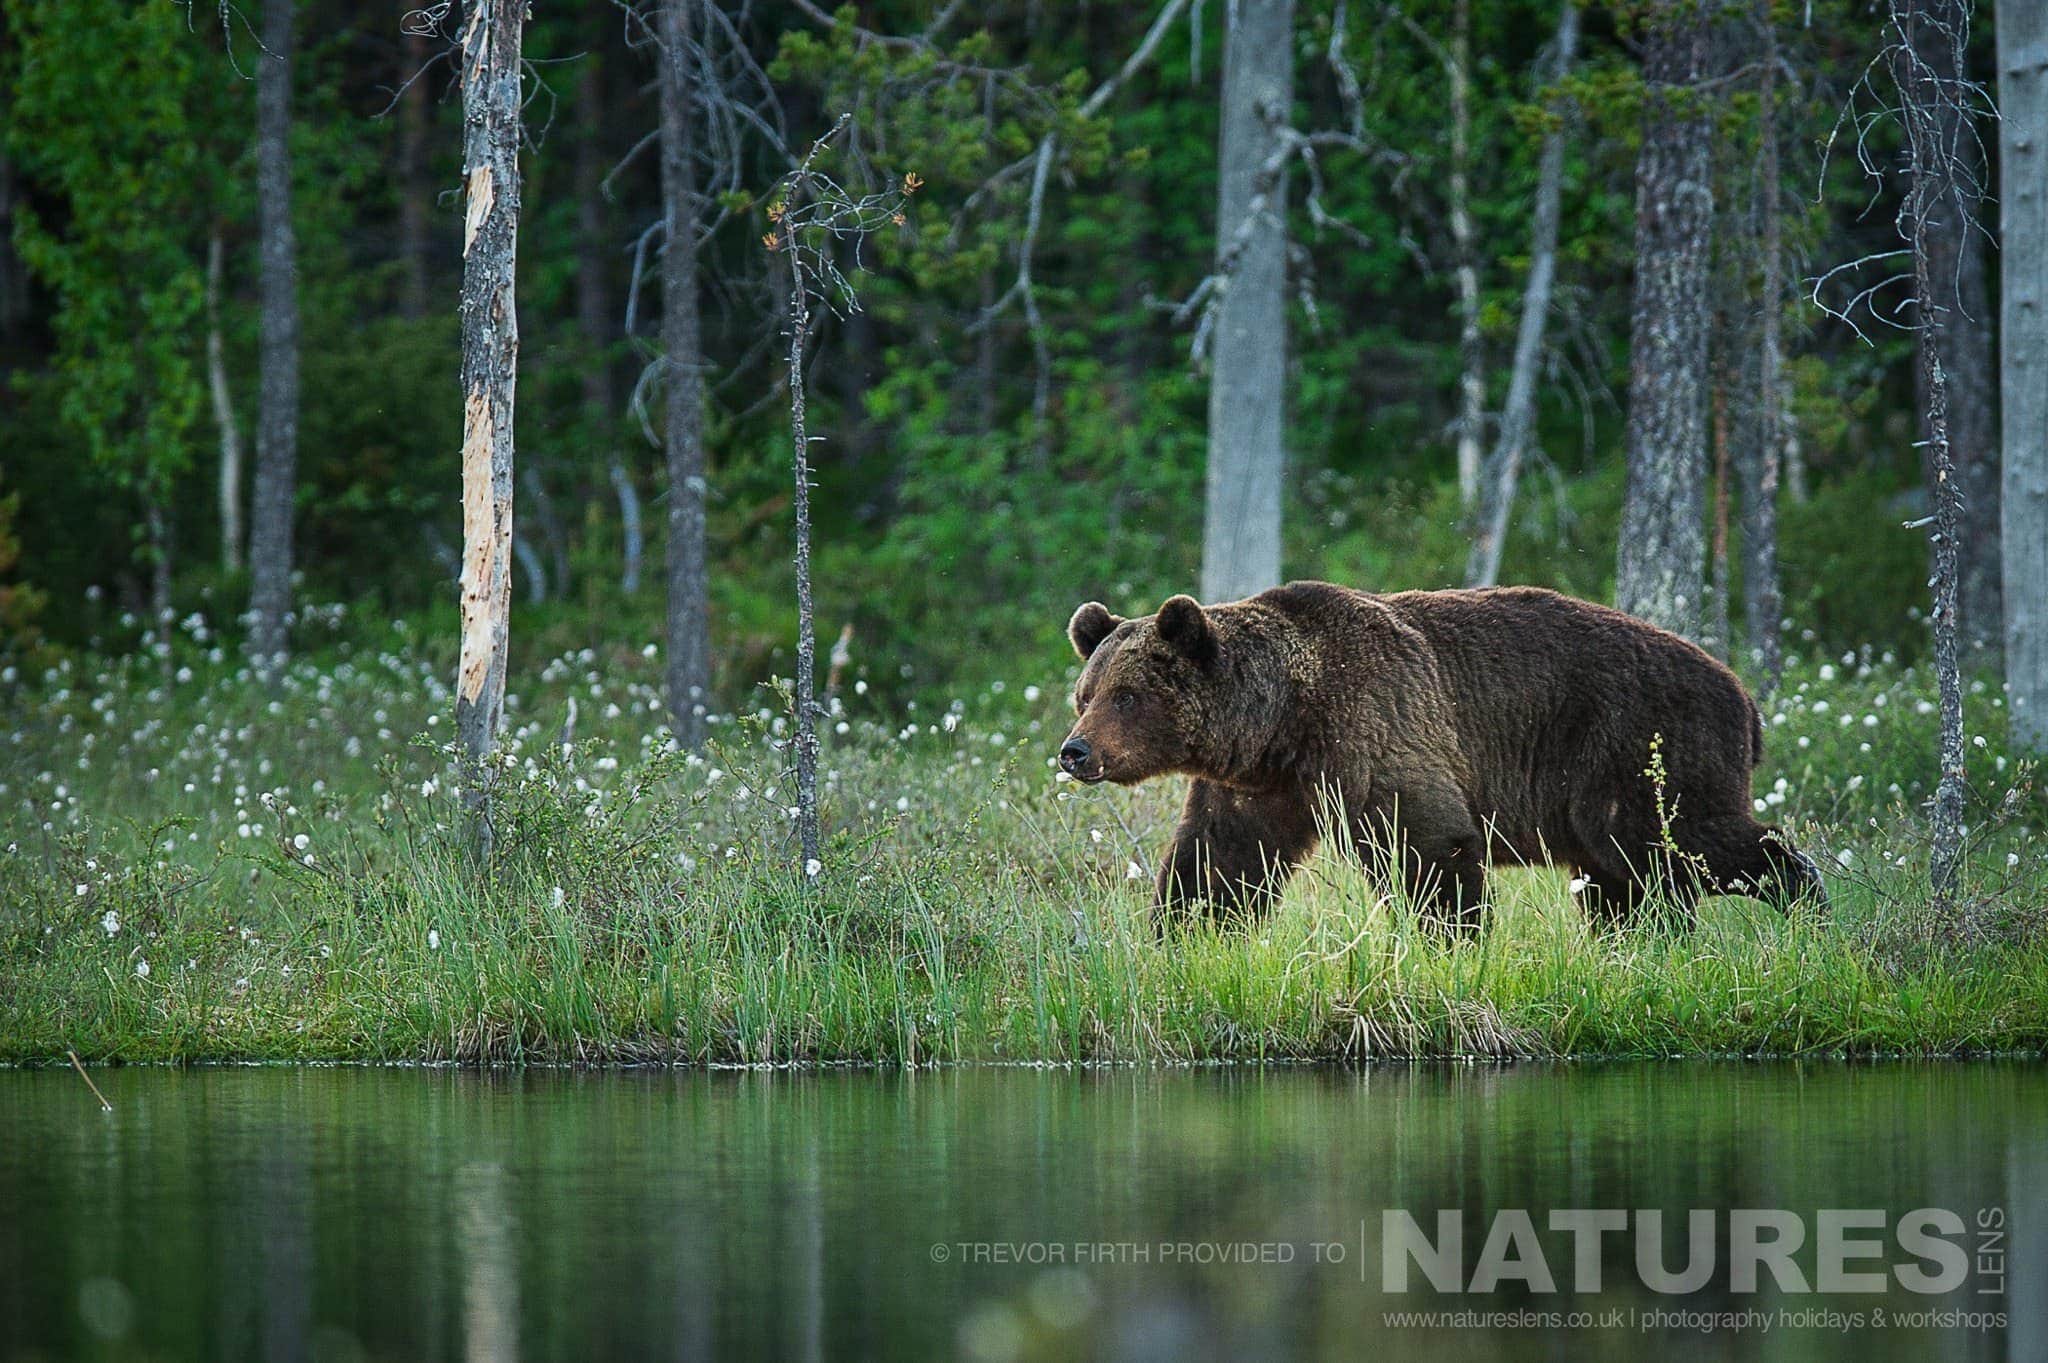 An image of a large adult wild brown bear as he walks adjacent to the lake photographed during the NaturesLens photography holiday to photograph the Wild Brown Bear